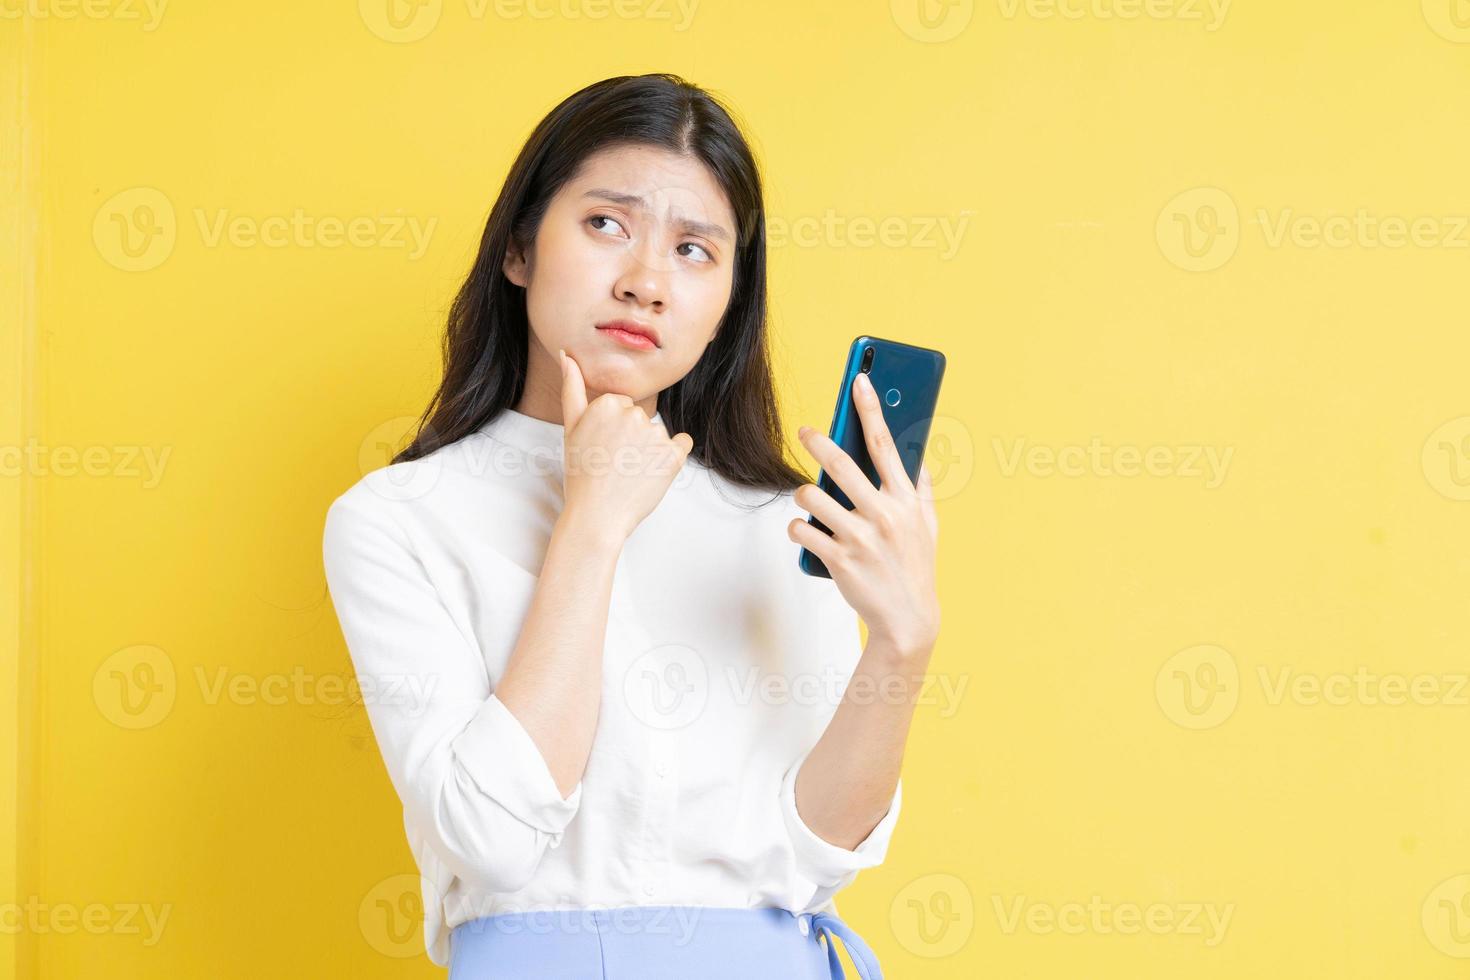 Young asian girl holding phone with expression on yellow background photo